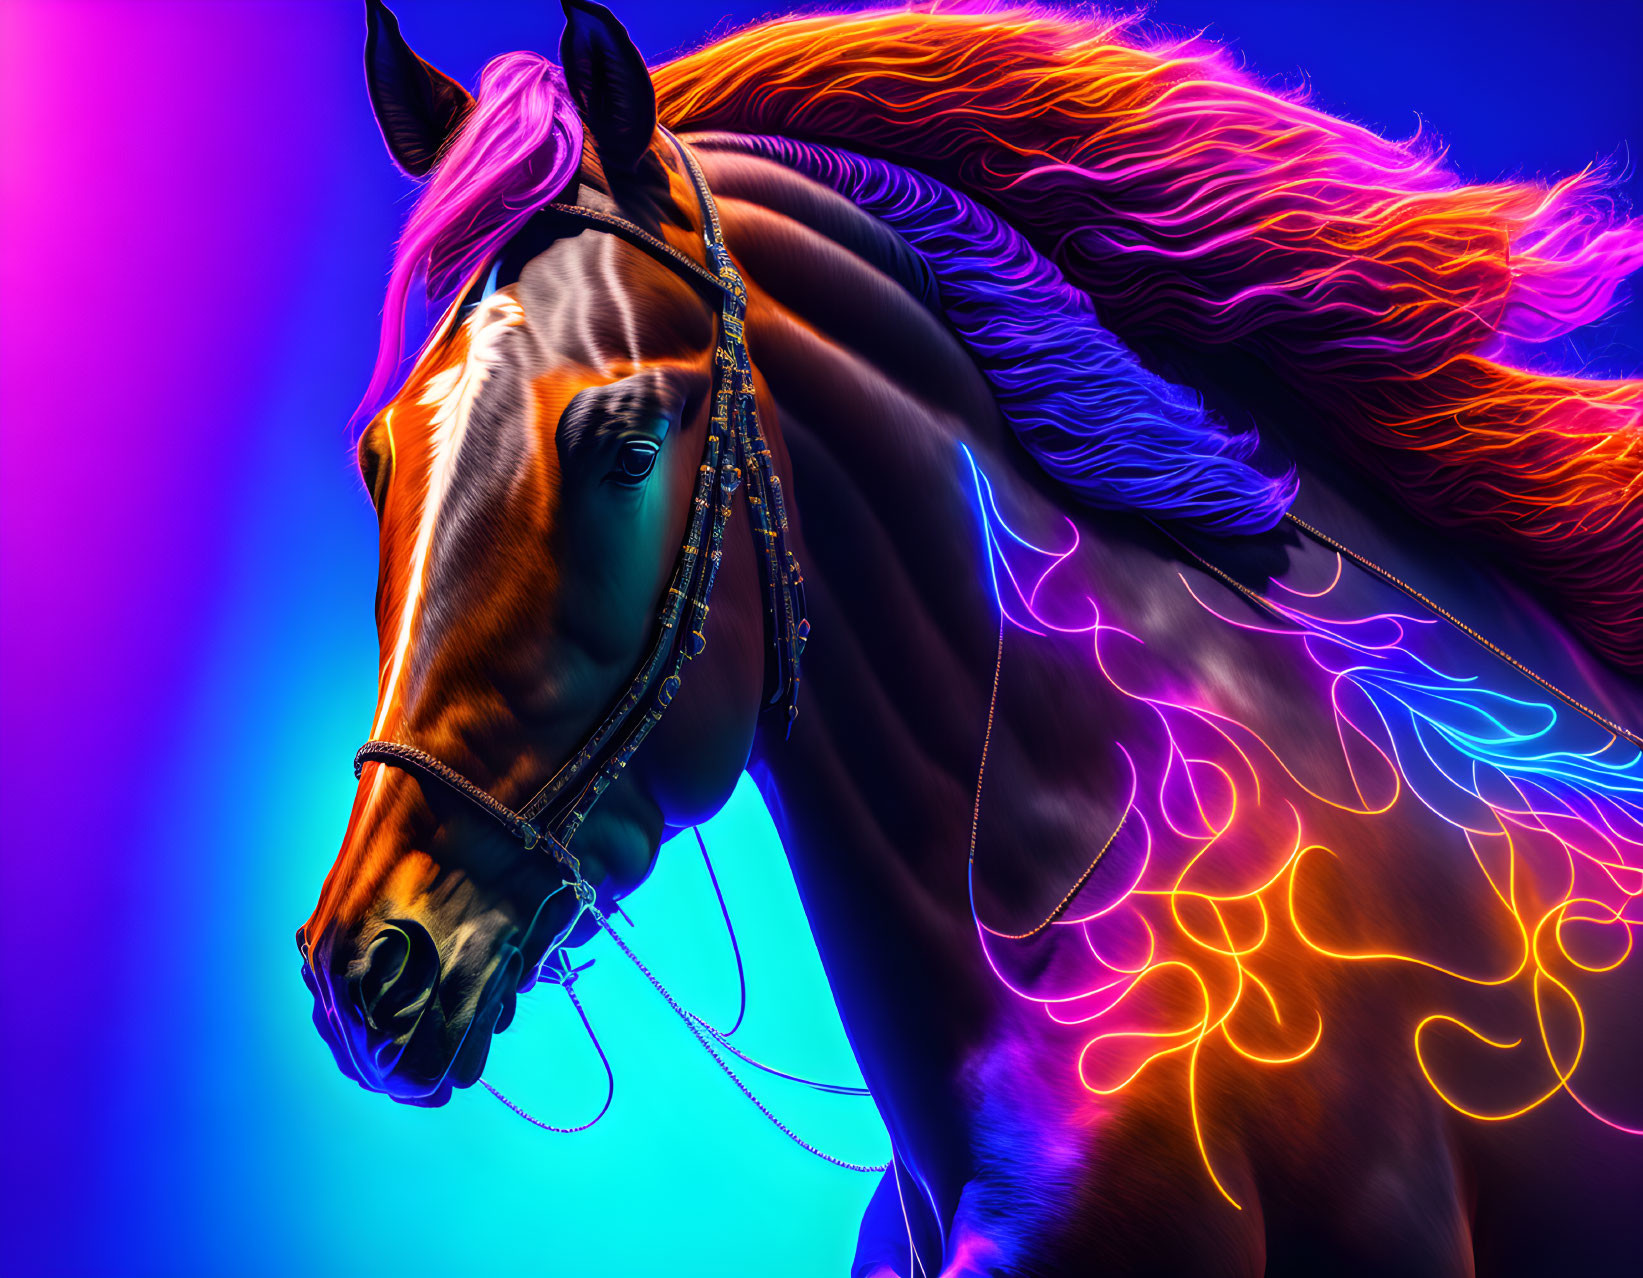 Colorful Horse Artwork with Neon Lights on Blue & Purple Background